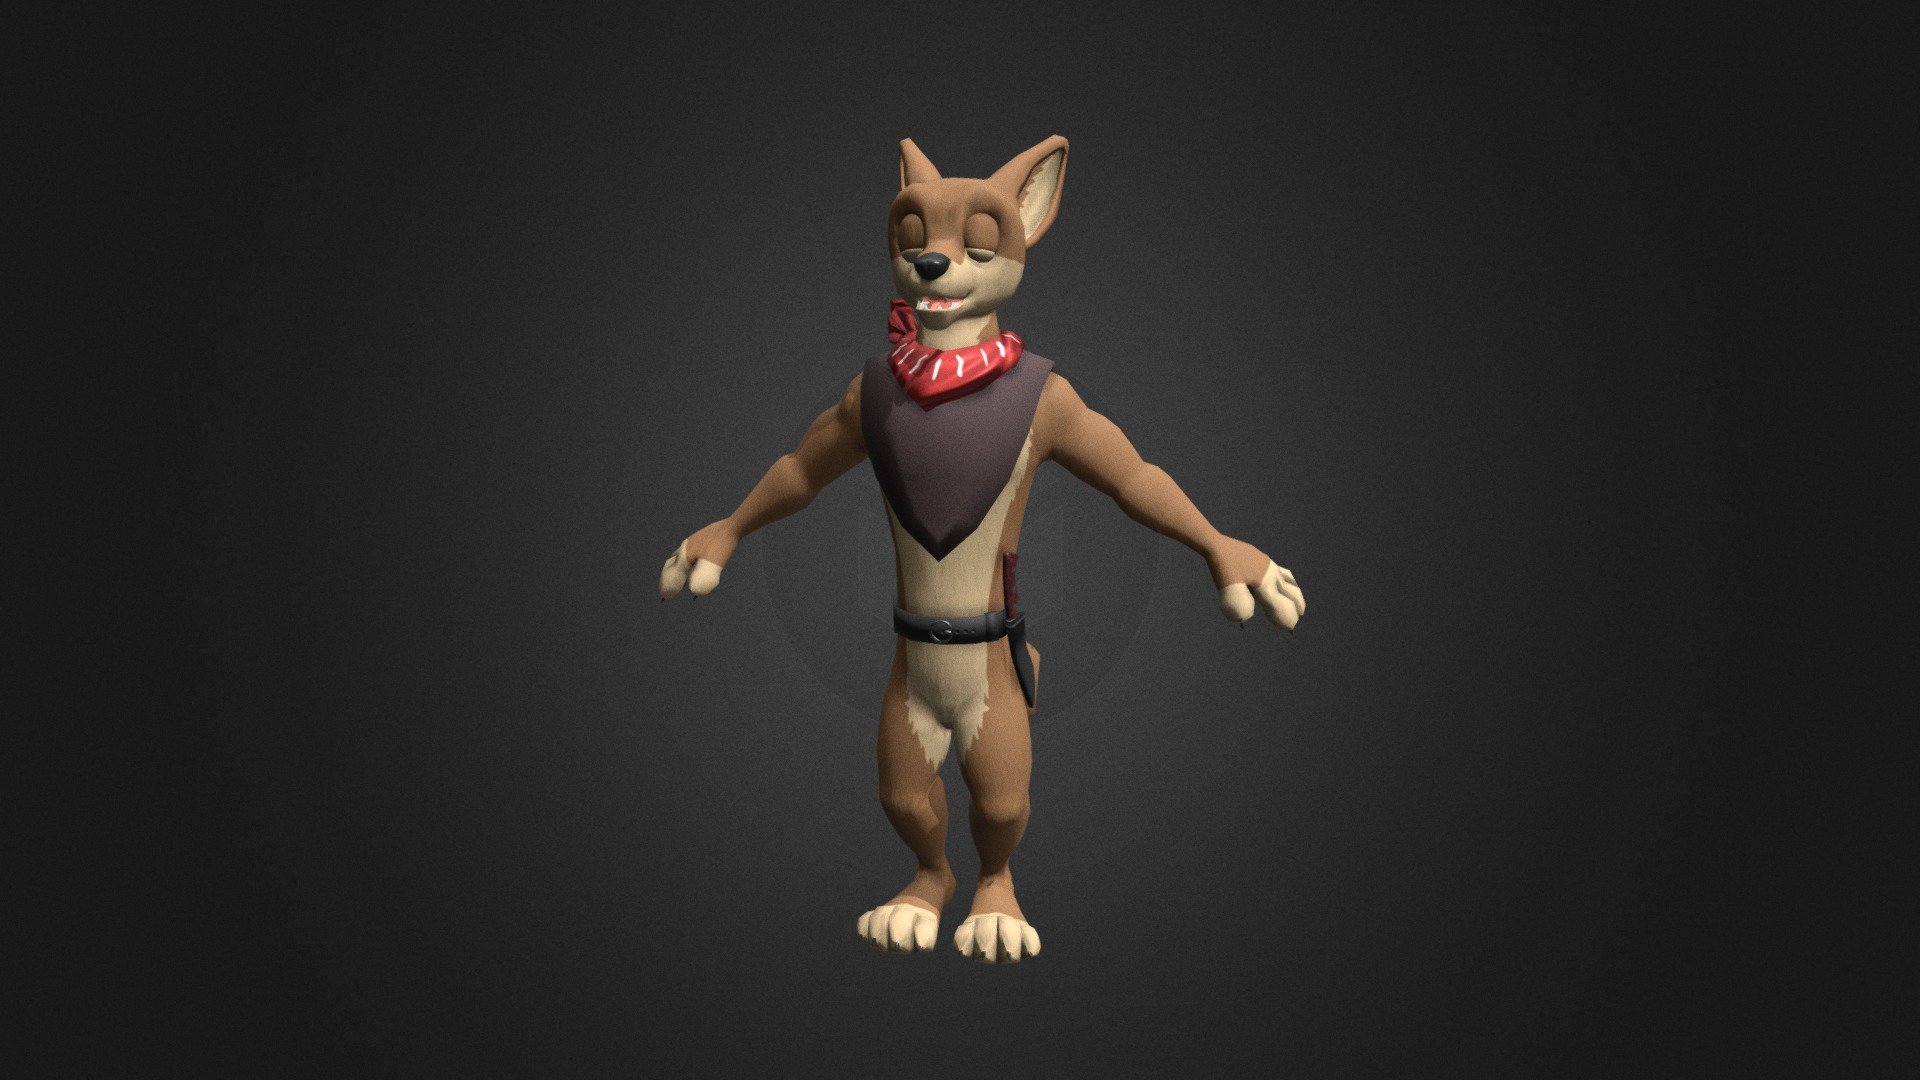 Anthropomorphic jackal for our upcoming game River's Rescue, based on a character design by Temiree.

Modeled in Blender, textured in Substance Painter 3d model